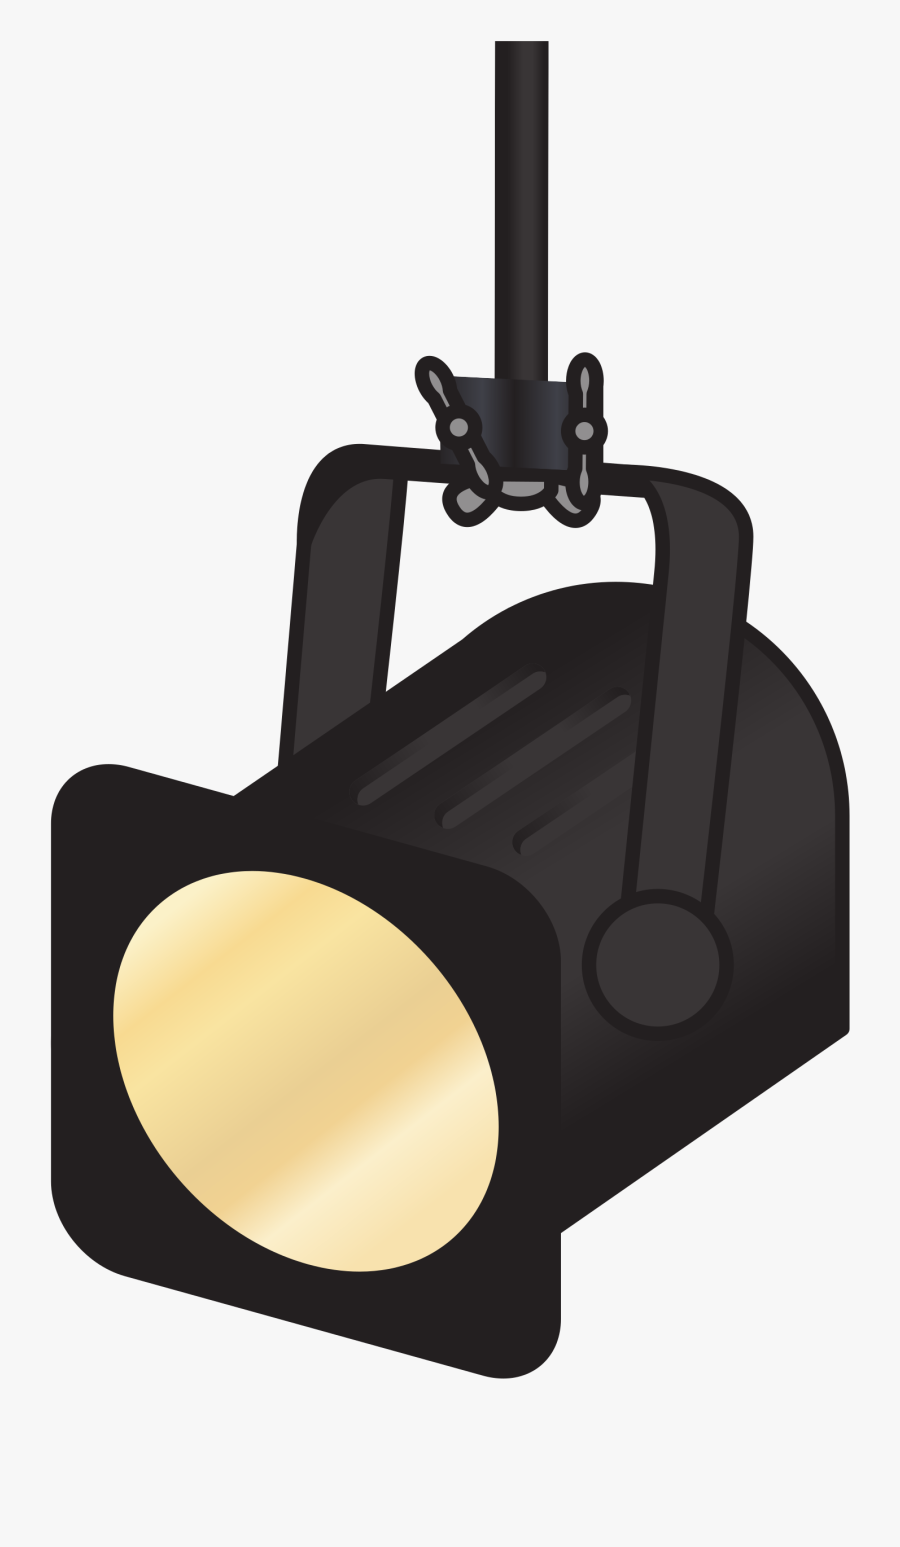 Theater Or Studio Spotlight On Roof Mount - Studio Lights Clipart Png, Transparent Clipart